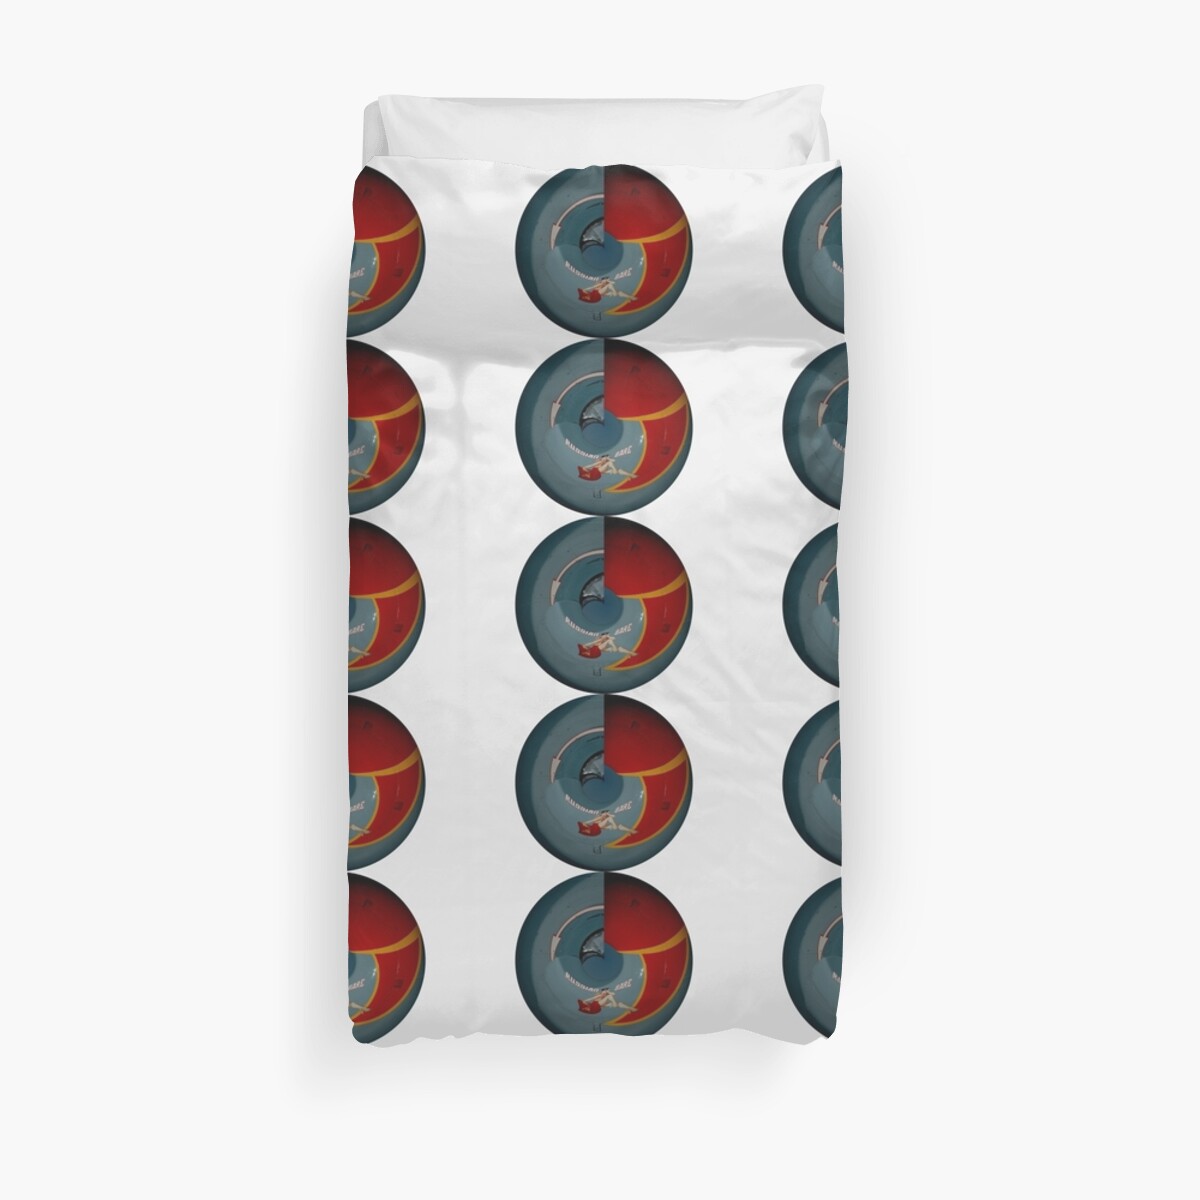 Russian Bare Duvet Cover By Muz2142 Redbubble